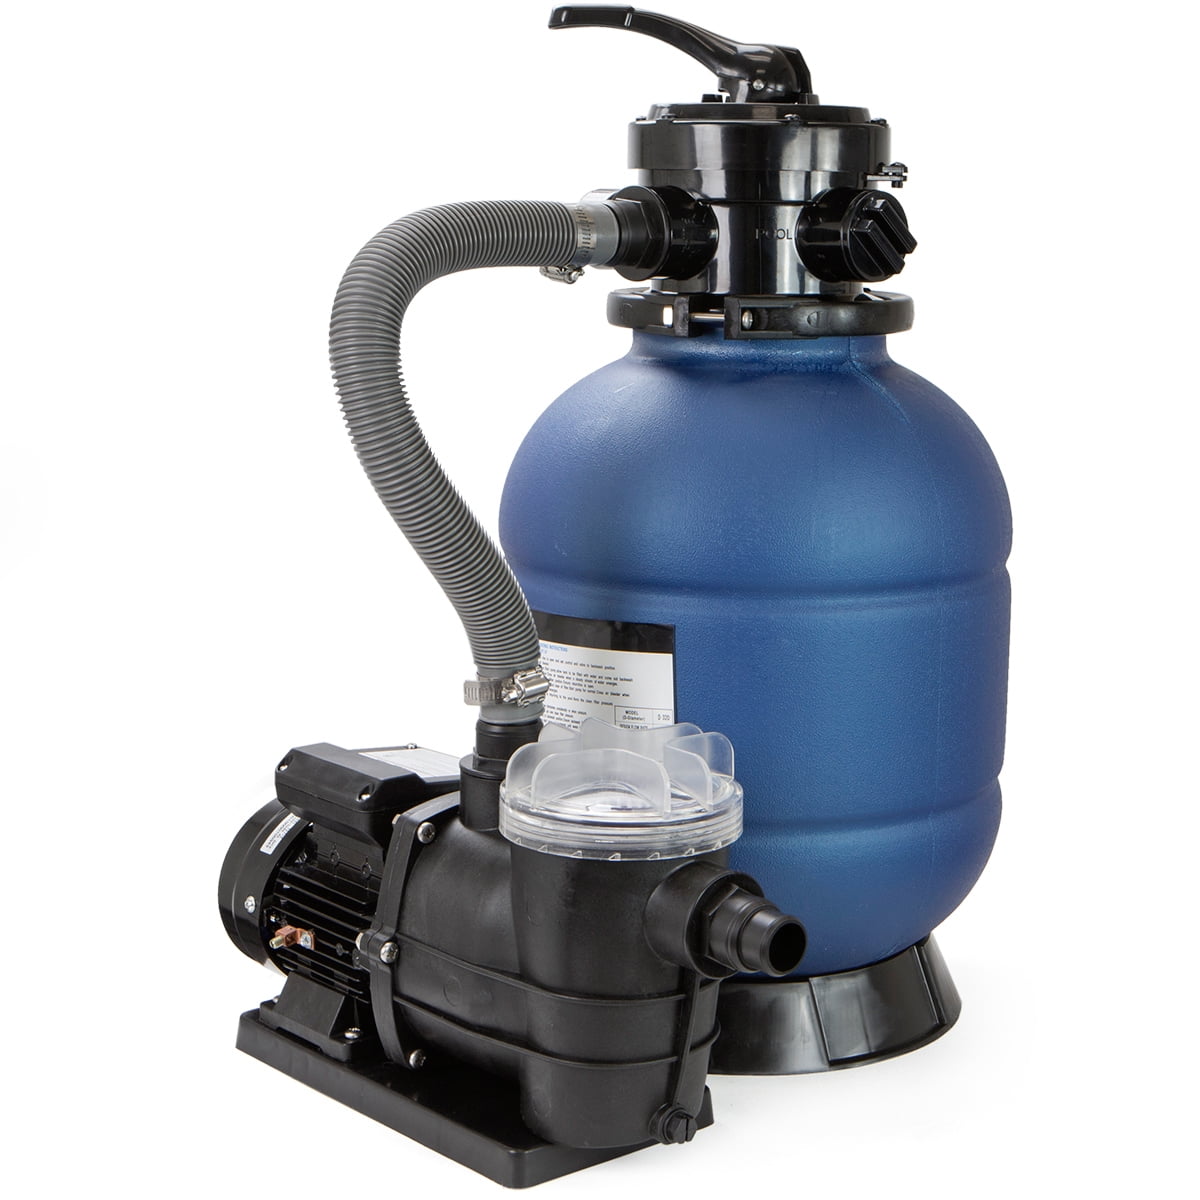 XtremepowerUS High-Flo 12" Sand with Pool Pump System Filter System Set - Walmart.com